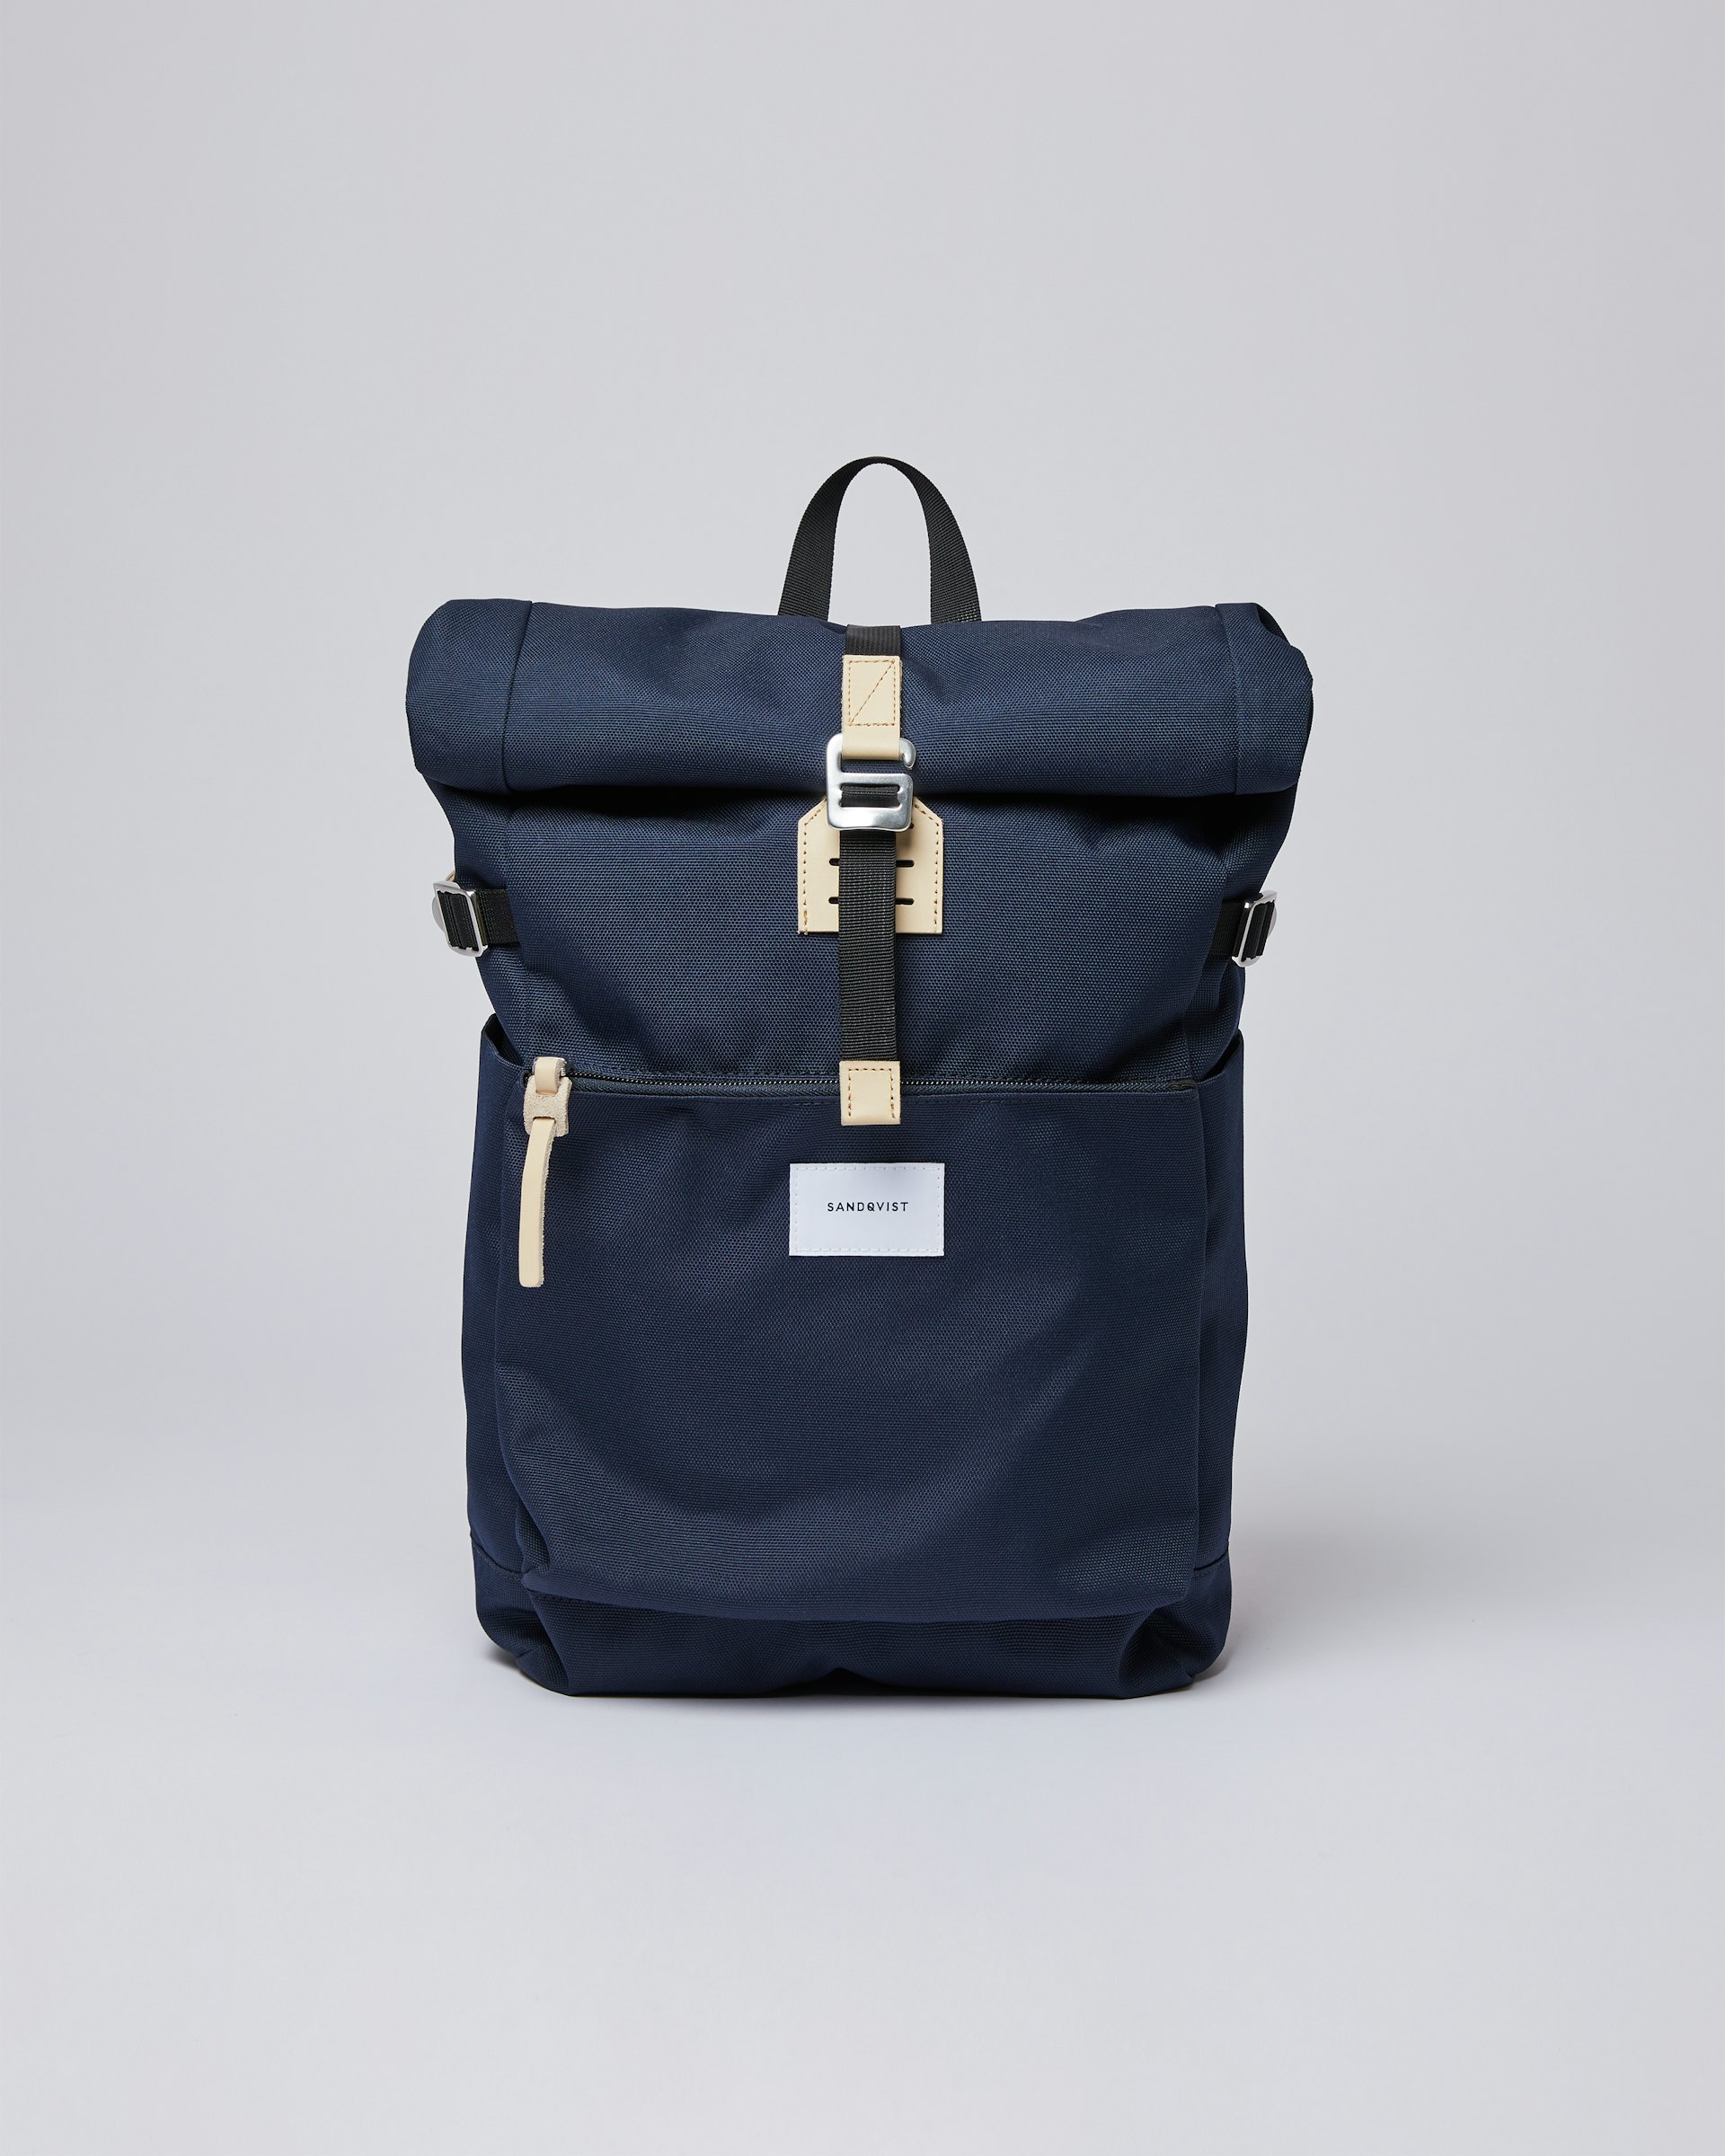 Ilon belongs to the category Sacs à dos and is in color navy